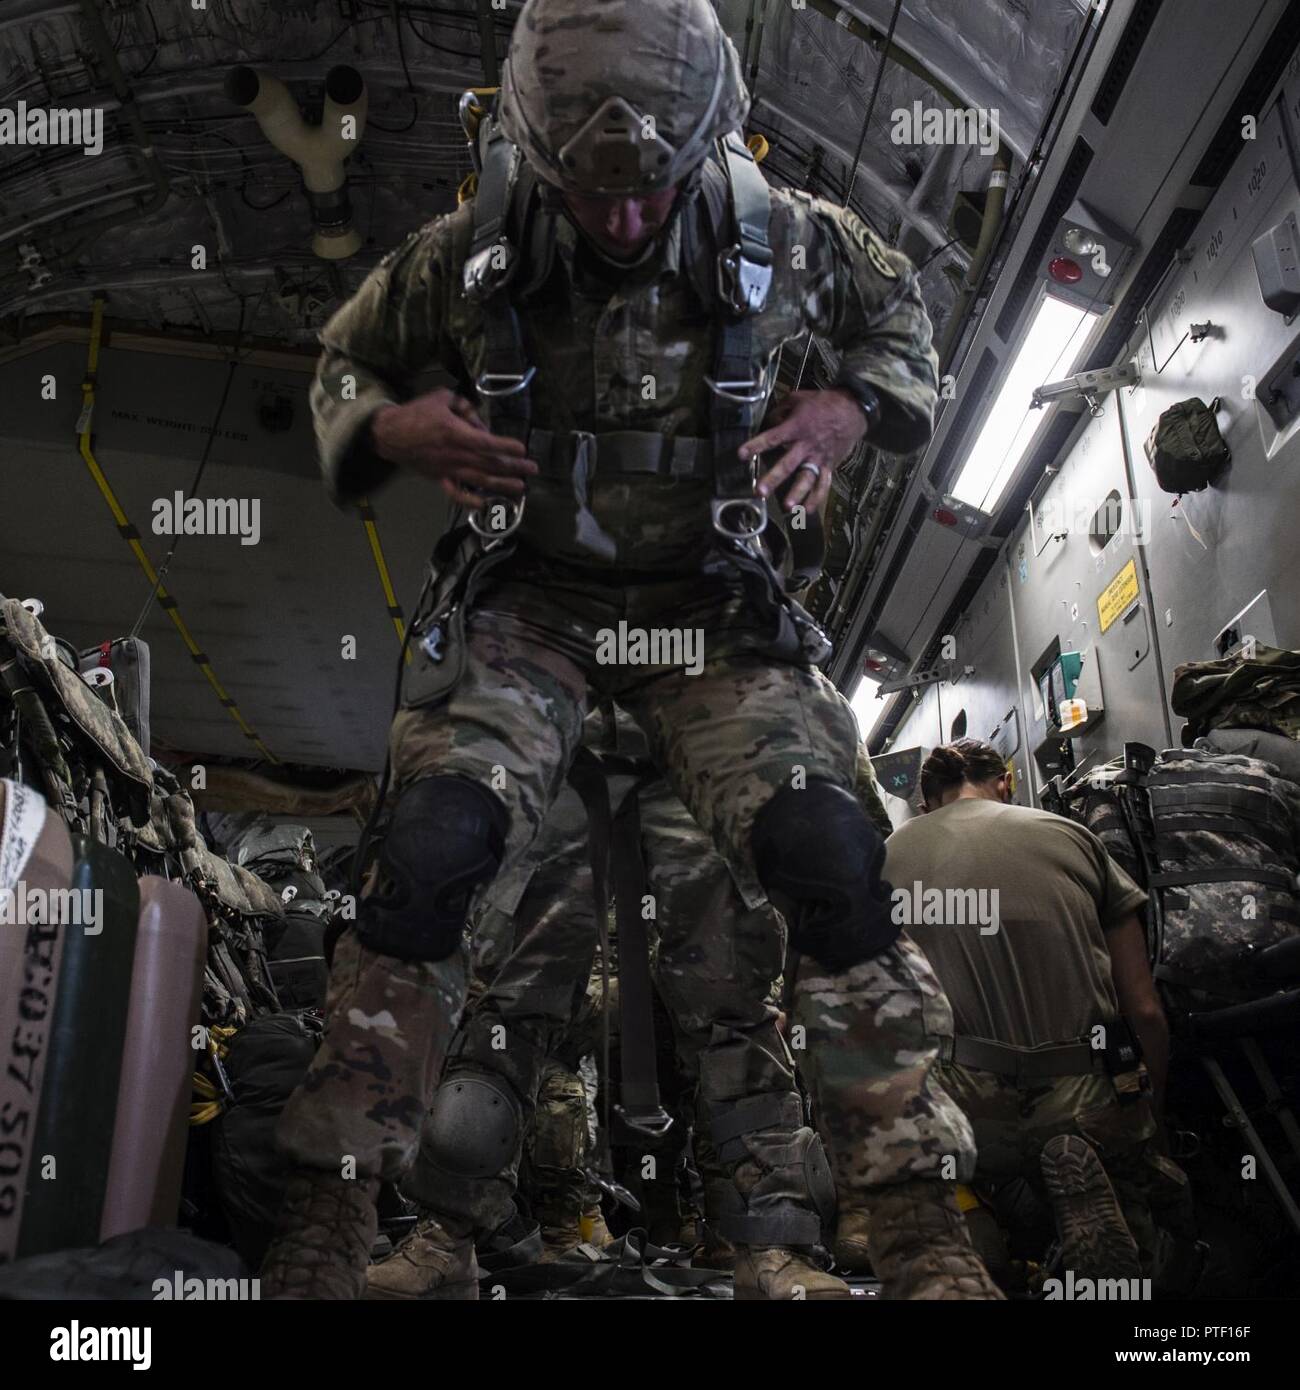 U.S. Army Sgt. Zachary Hudson, airborne paratrooper from the 4th Brigade 25th Infantry division, rigs his gear to prepare for drop onboard a U.S. Air Force C-17 from Joint Base Charleston, S.C., July 12, 2017 to participate in Exercise Talisman Saber 2017. The purpose of TS17 is to improve U.S.-Australian combat readiness, increase interoperability, maximize combined training opportunities and conduct maritime prepositioning and logistics operations in the Pacific. TS17 also demonstrates U.S. commitment to its key ally and the overarching security framework in the Indo Asian Pacific region. Stock Photo